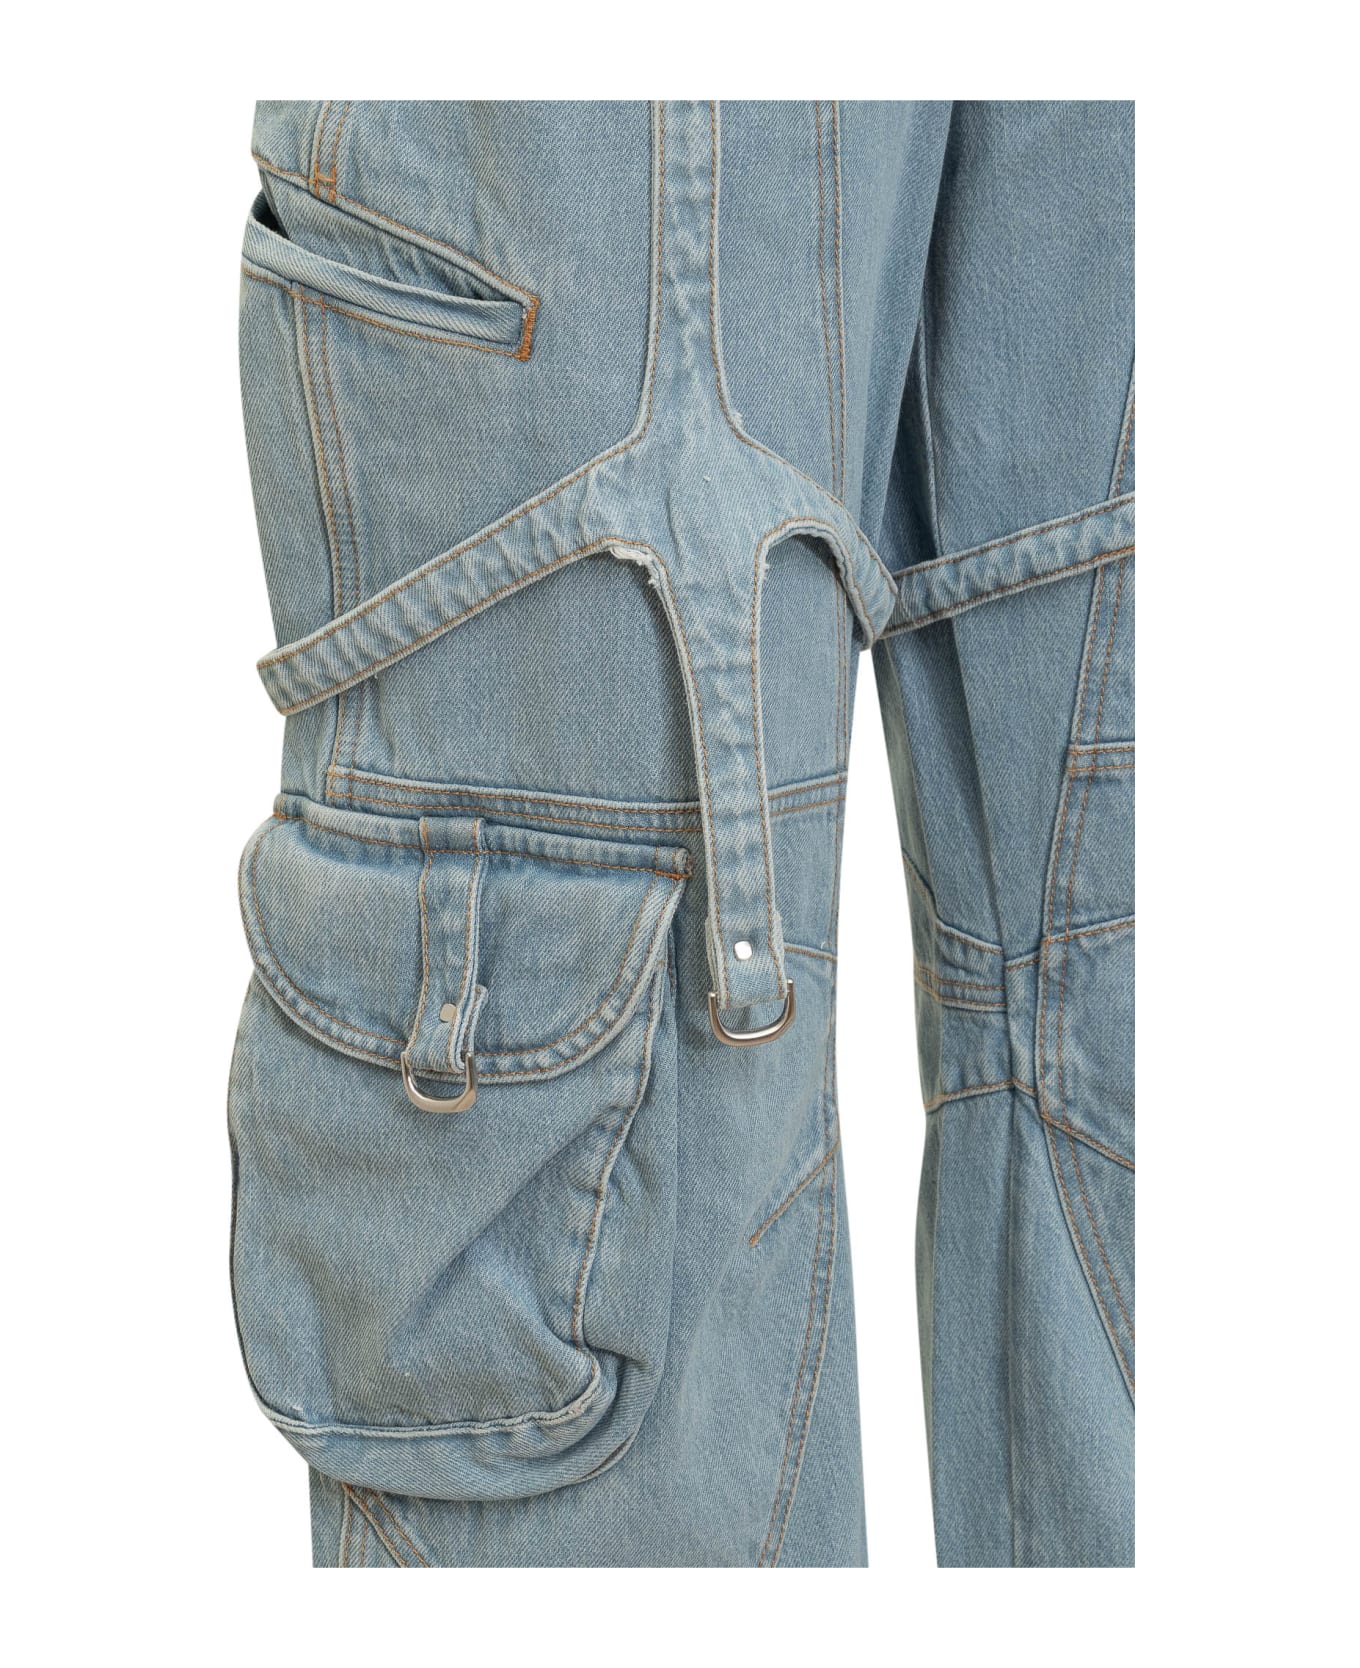 Off-White Bleached Cargo Jeans - LIGHT BLUE